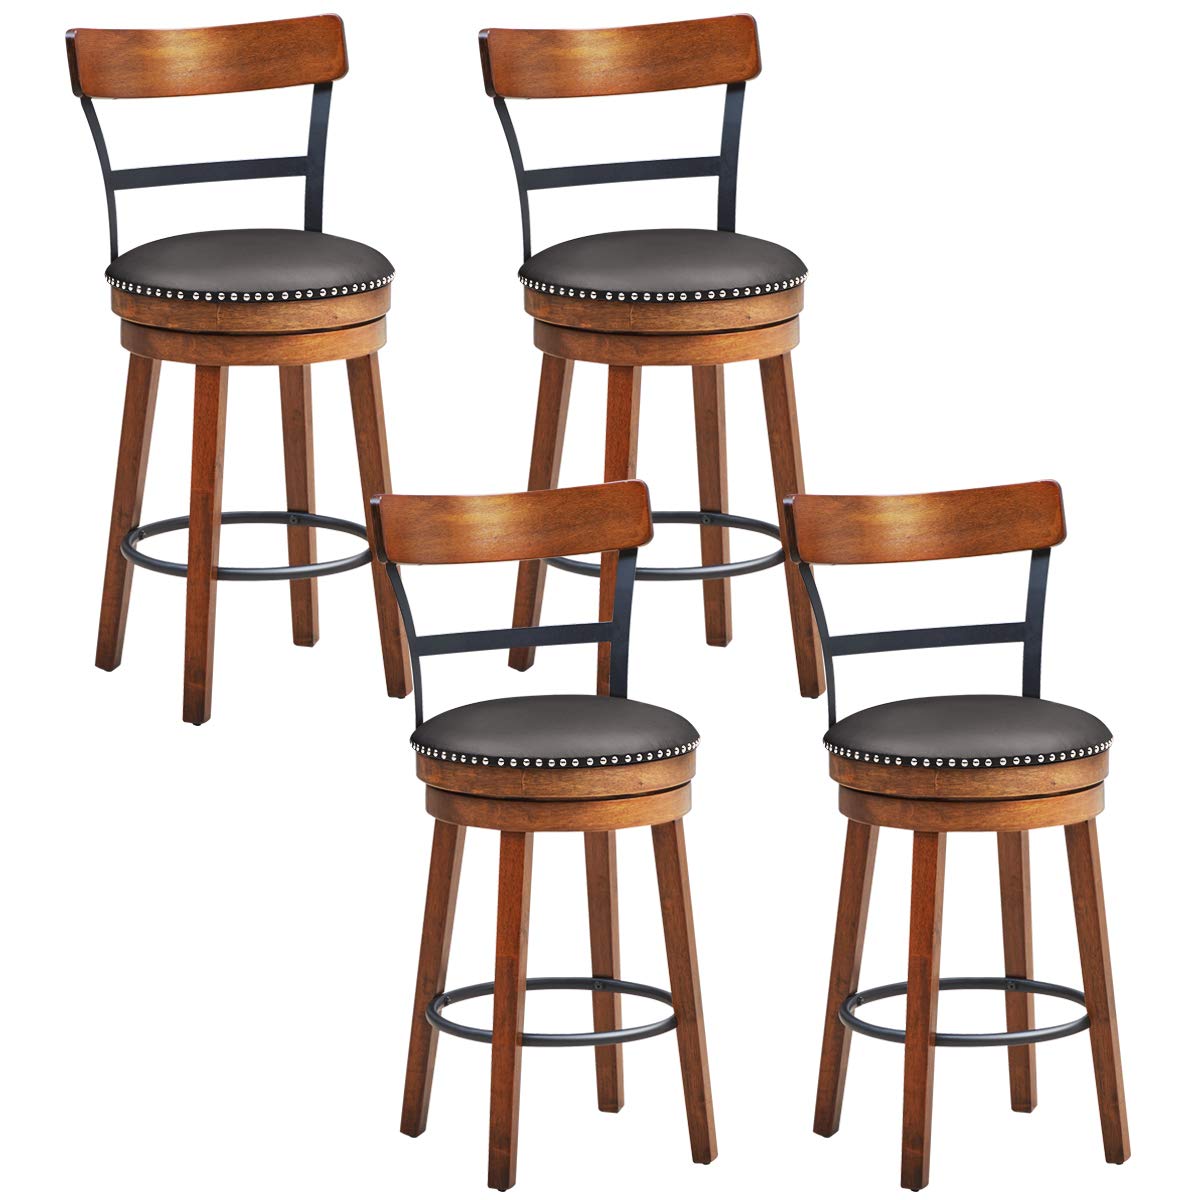 360-Degree Swivel Stools with Leather Padded Seat, Single Slat Ladder Back & Solid Rubber Wood Legs